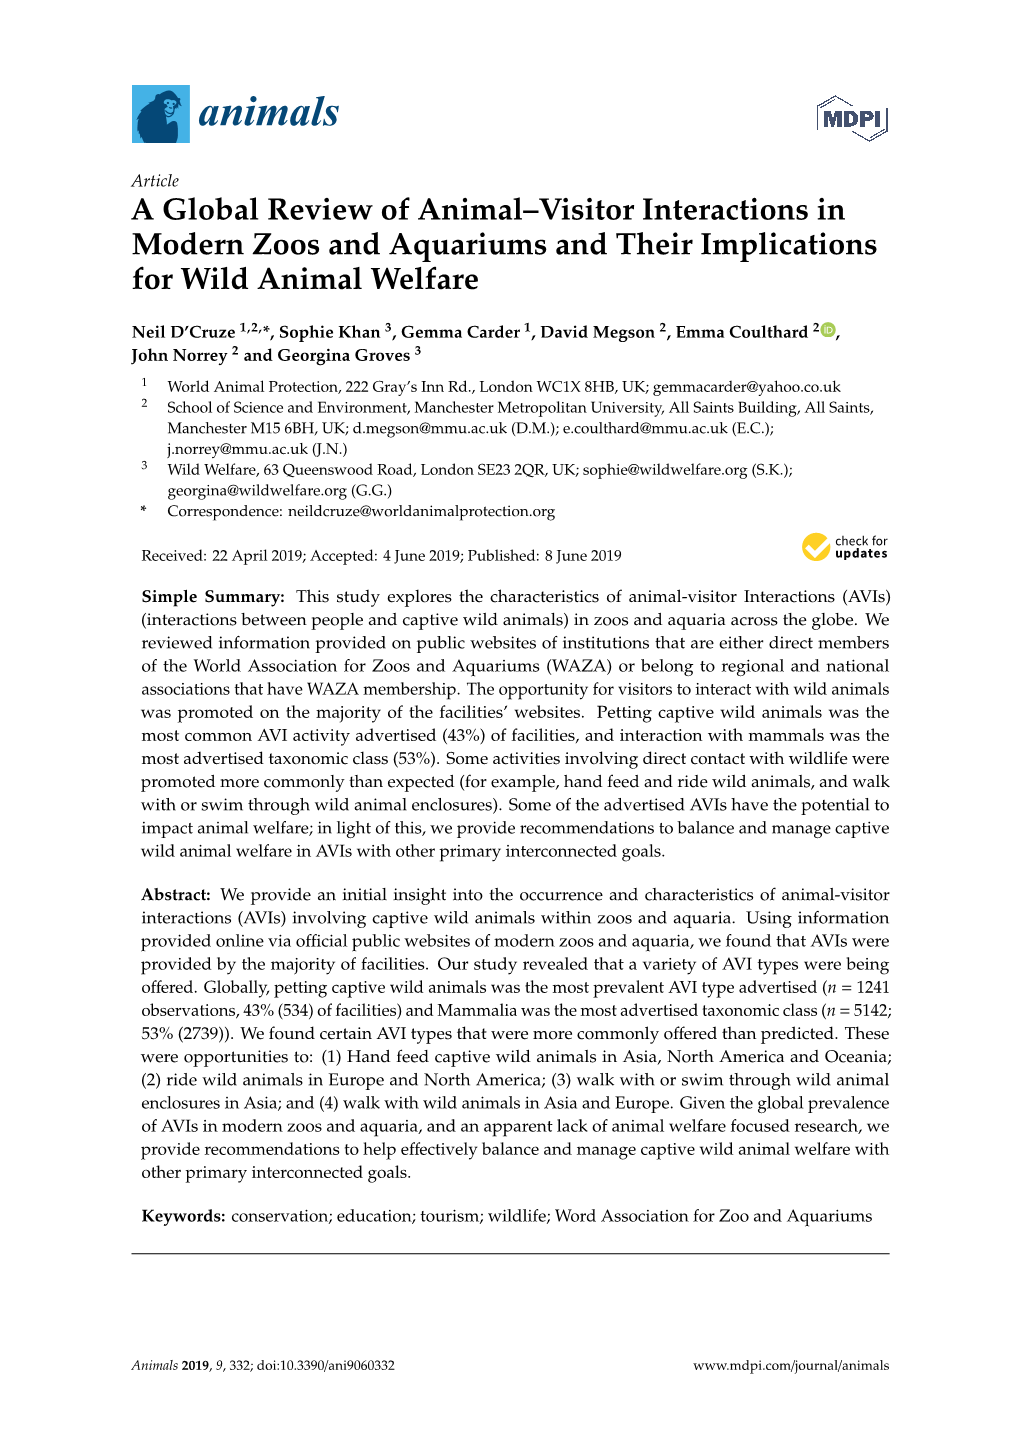 A Global Review of Animal–Visitor Interactions in Modern Zoos and Aquariums and Their Implications for Wild Animal Welfare